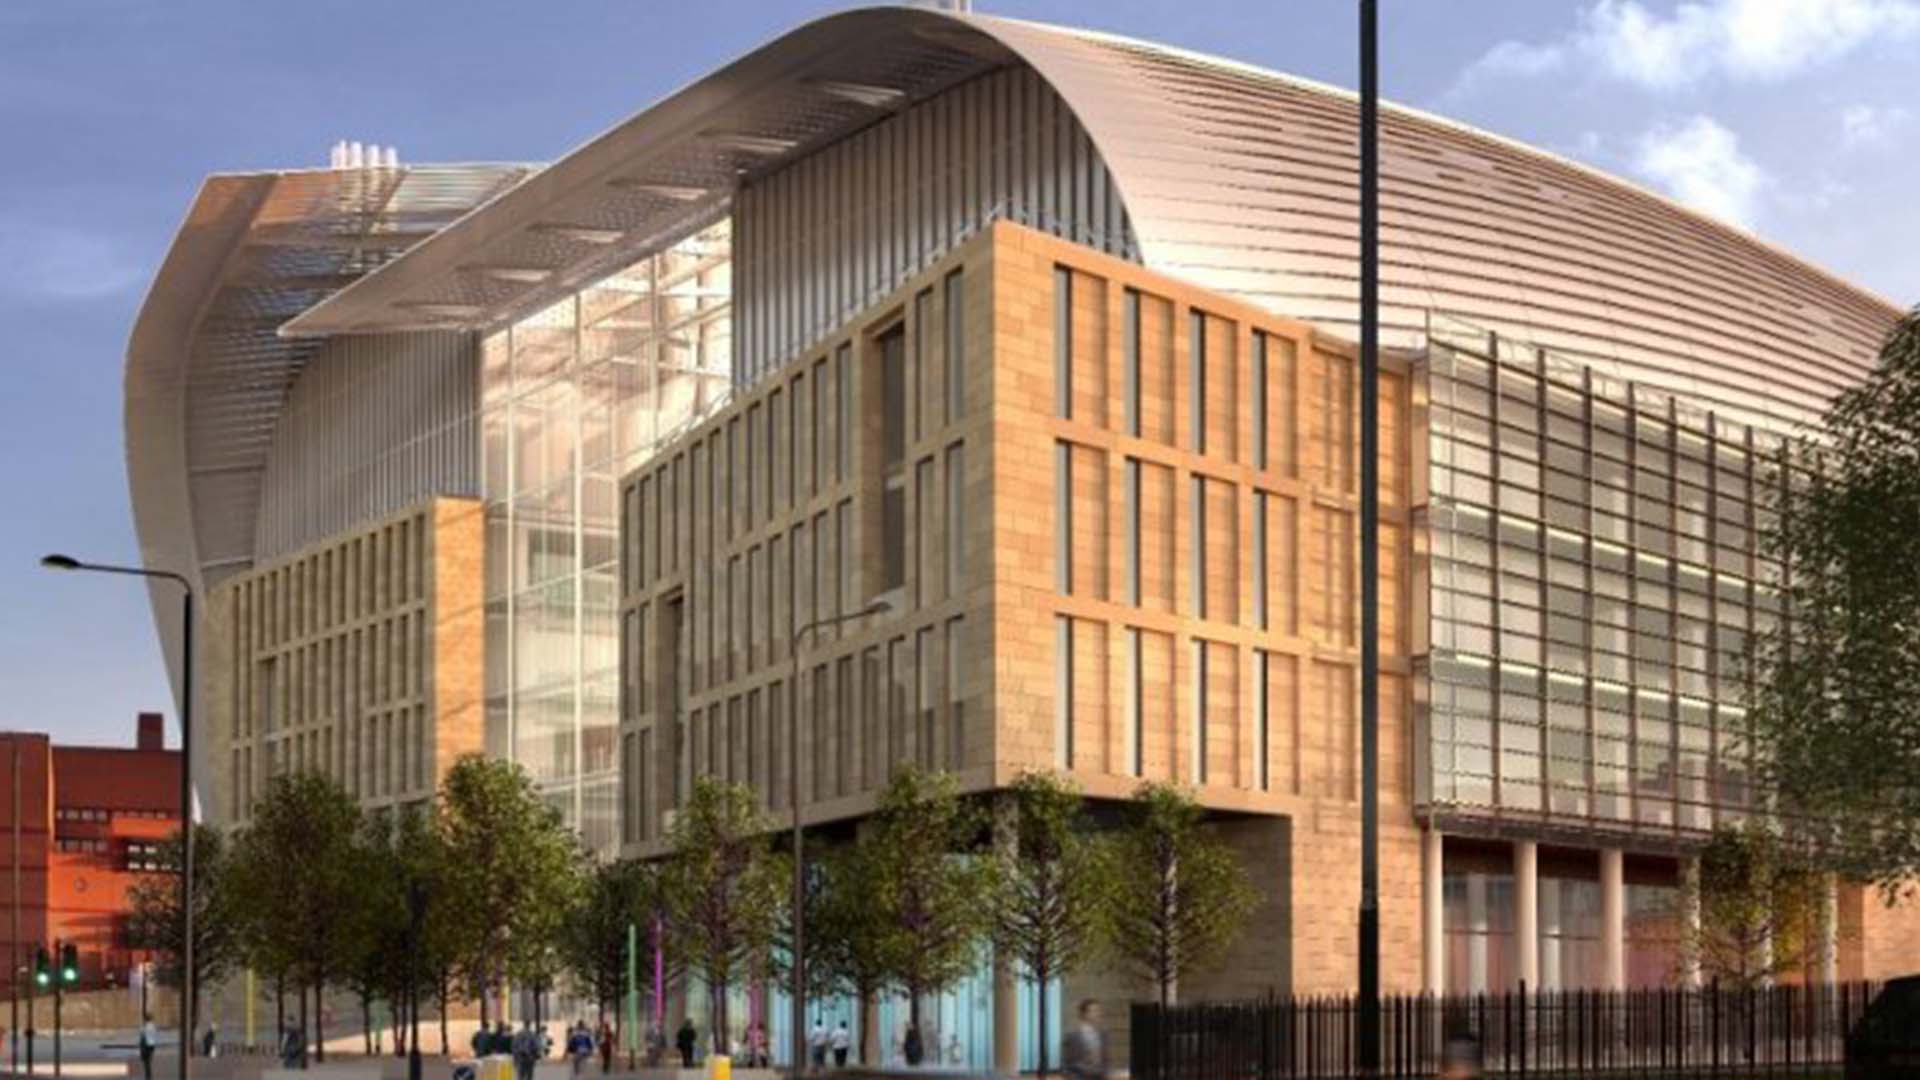 Energy Management at the Francis crick Institute